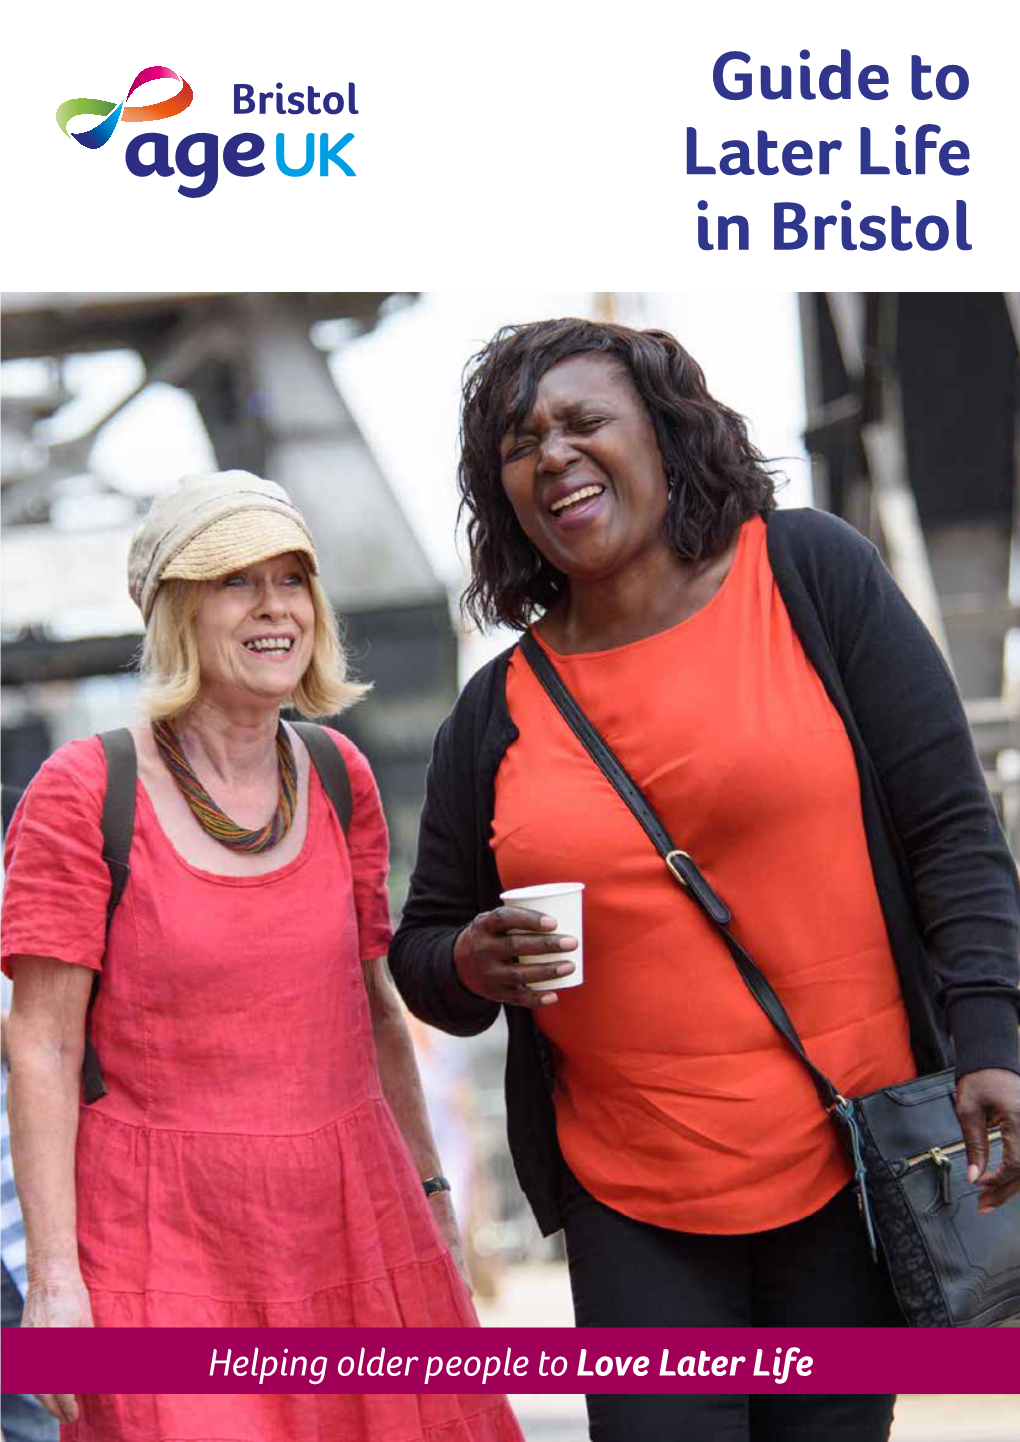 Guide to Later Life in Bristol